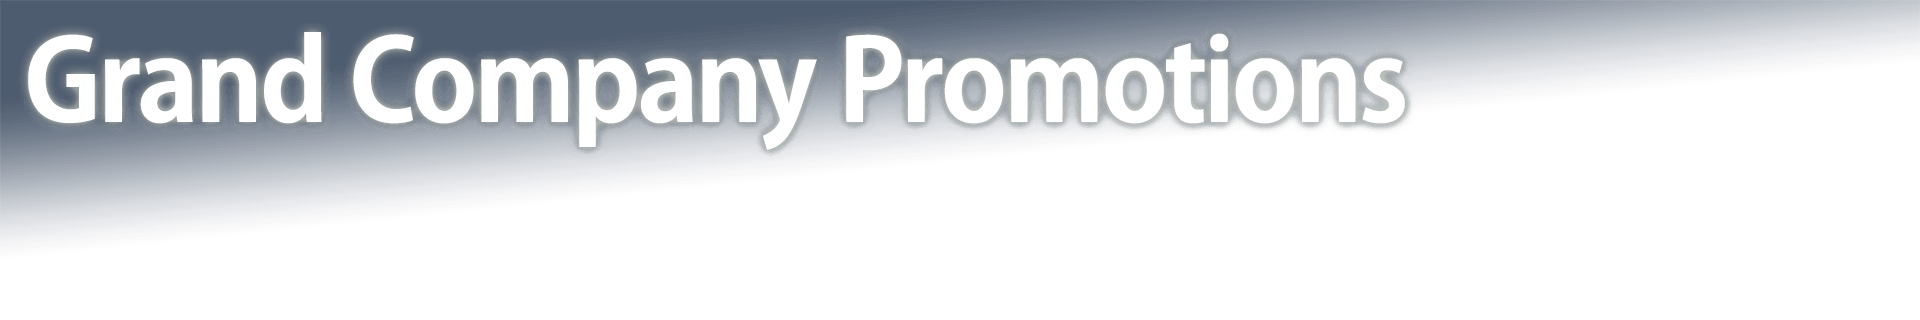 Grand Company Promotions